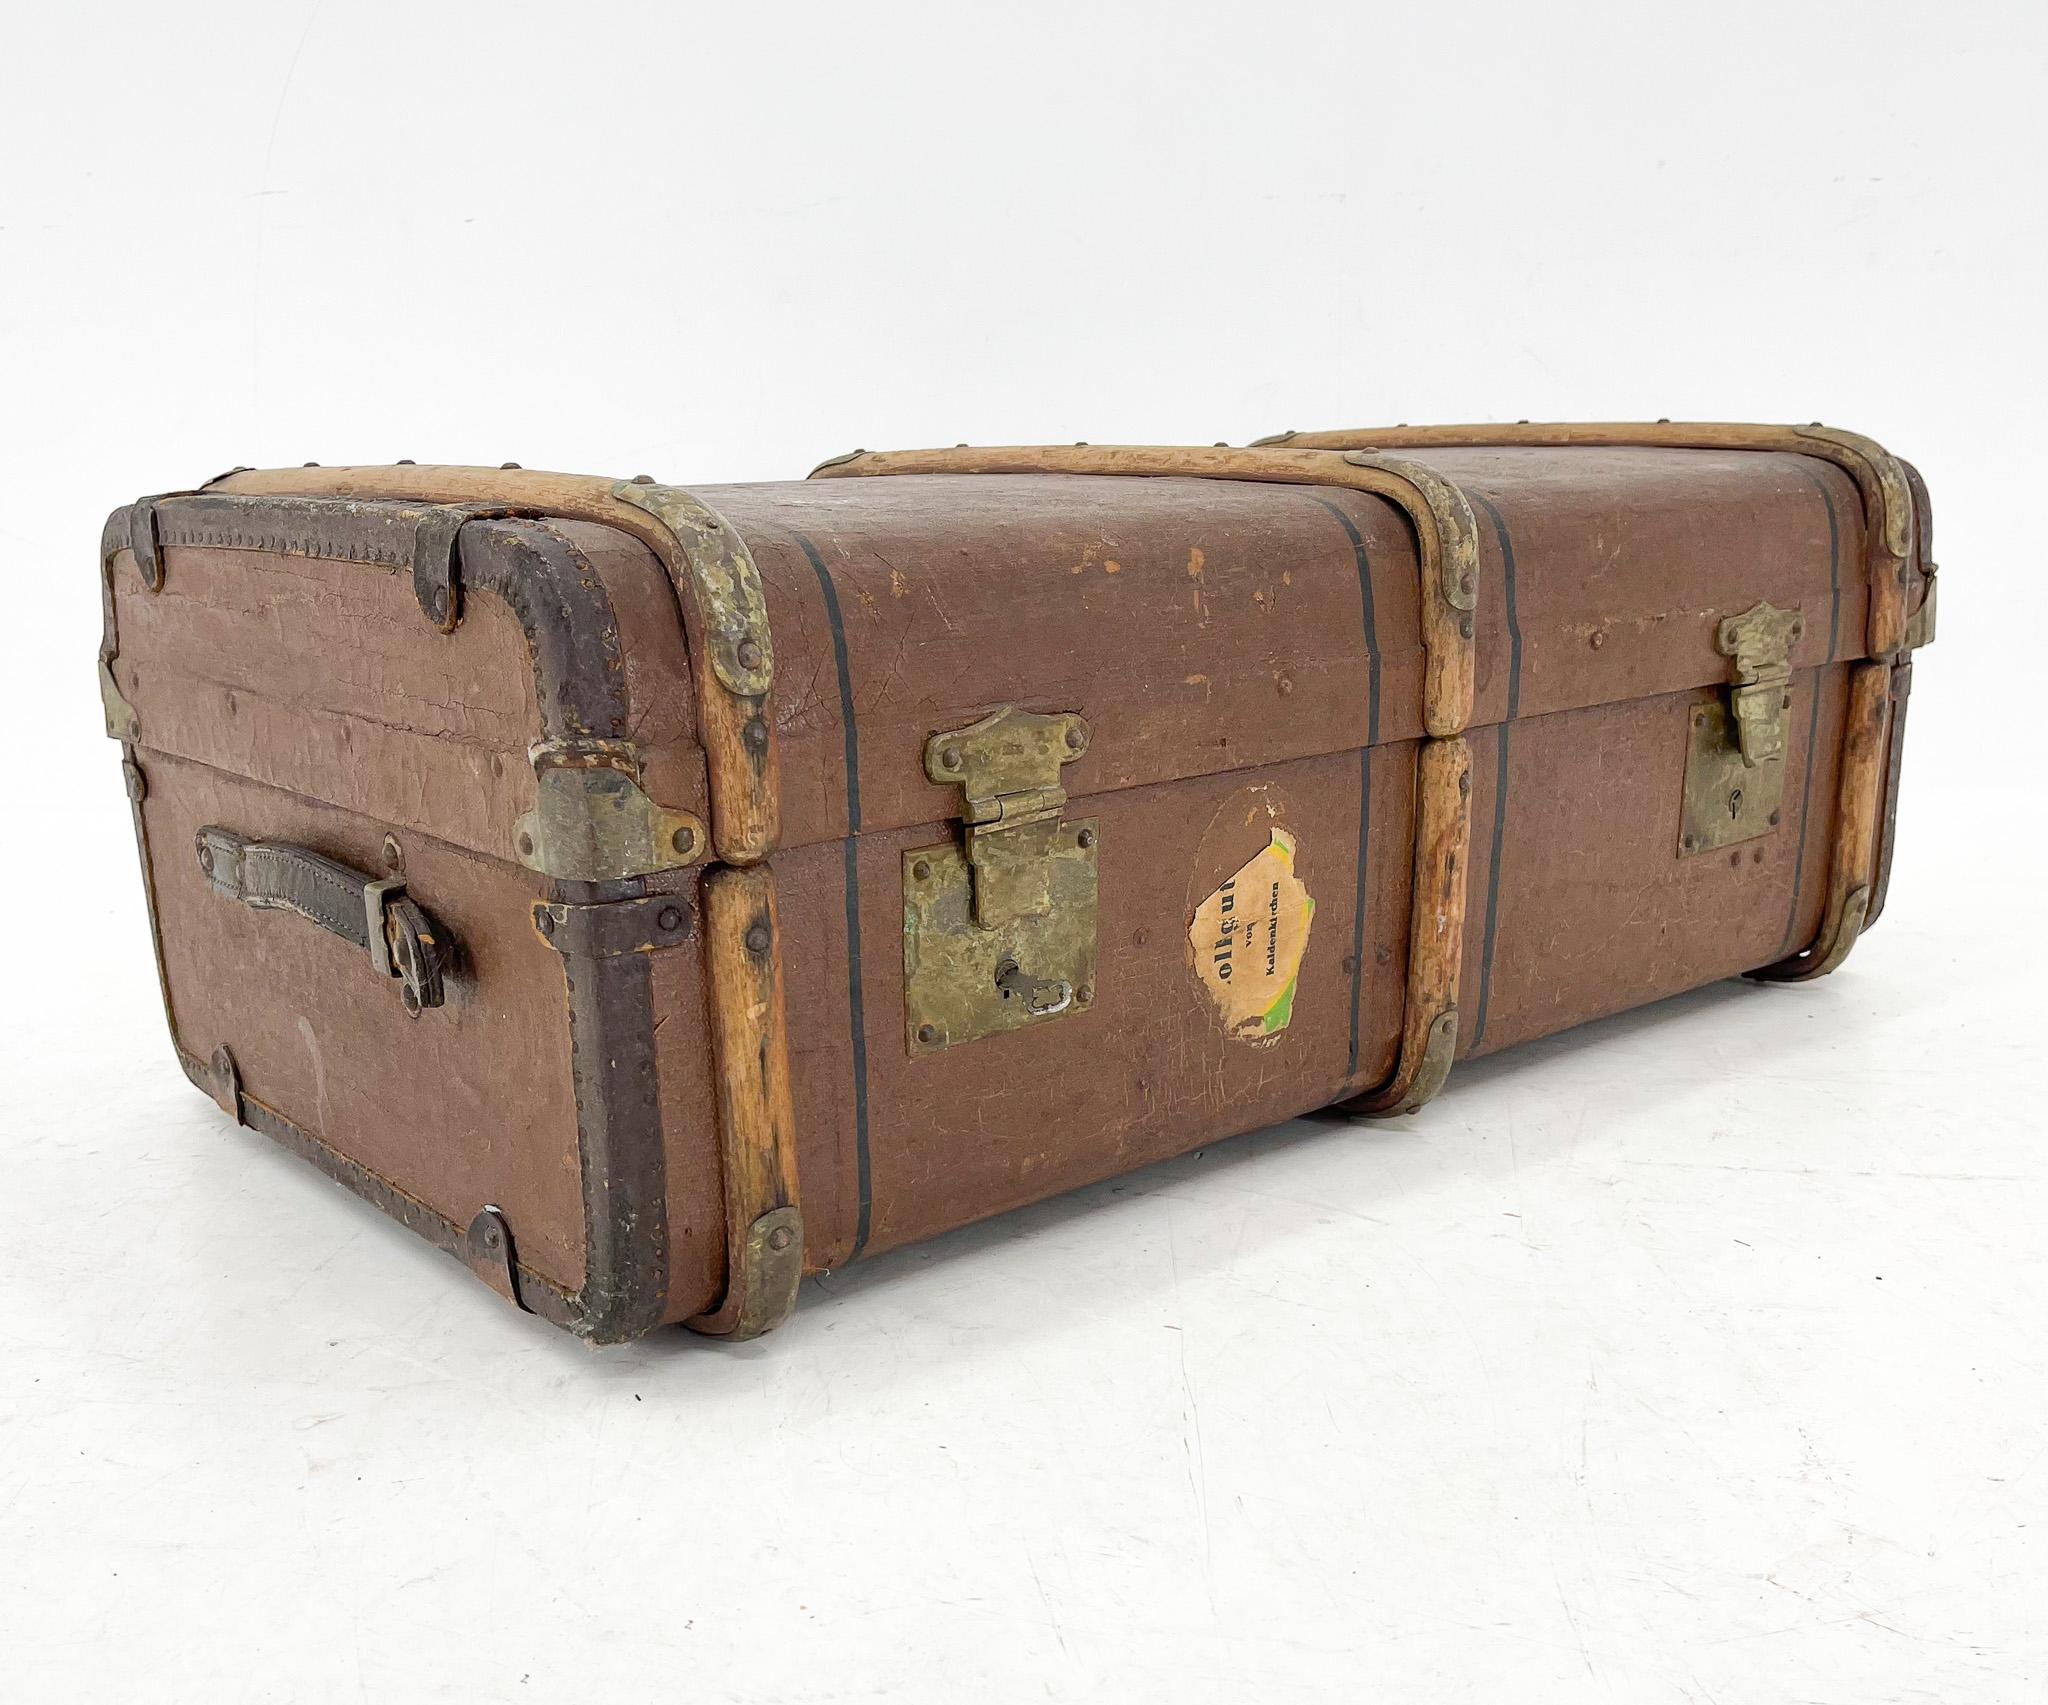 Antique travel case with wooden straps, original locks with one working key to both locks. The handles and side edges of the case are leather. There is metal hardware on the wooden straps and monograms on the top. The suitcase is suitable for the